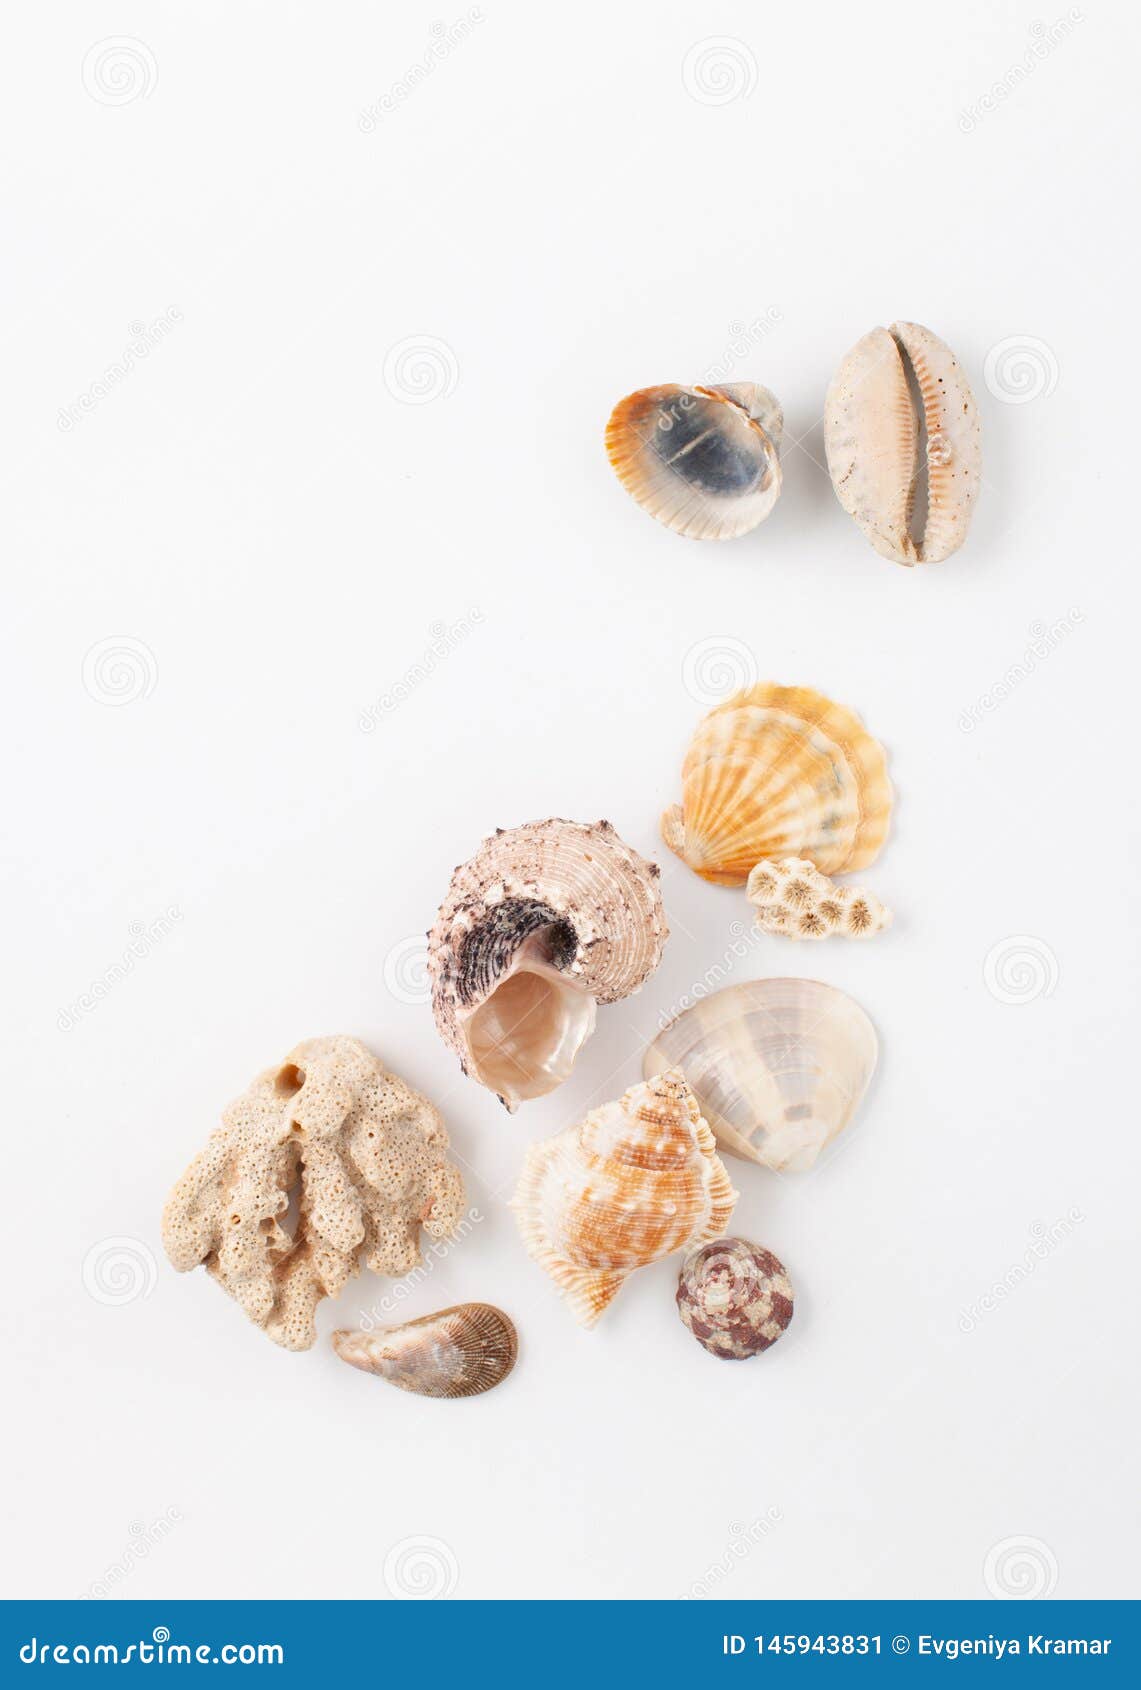 Collection of Seashells for Jewelry Stock Image - Image of marine, concept:  145943831